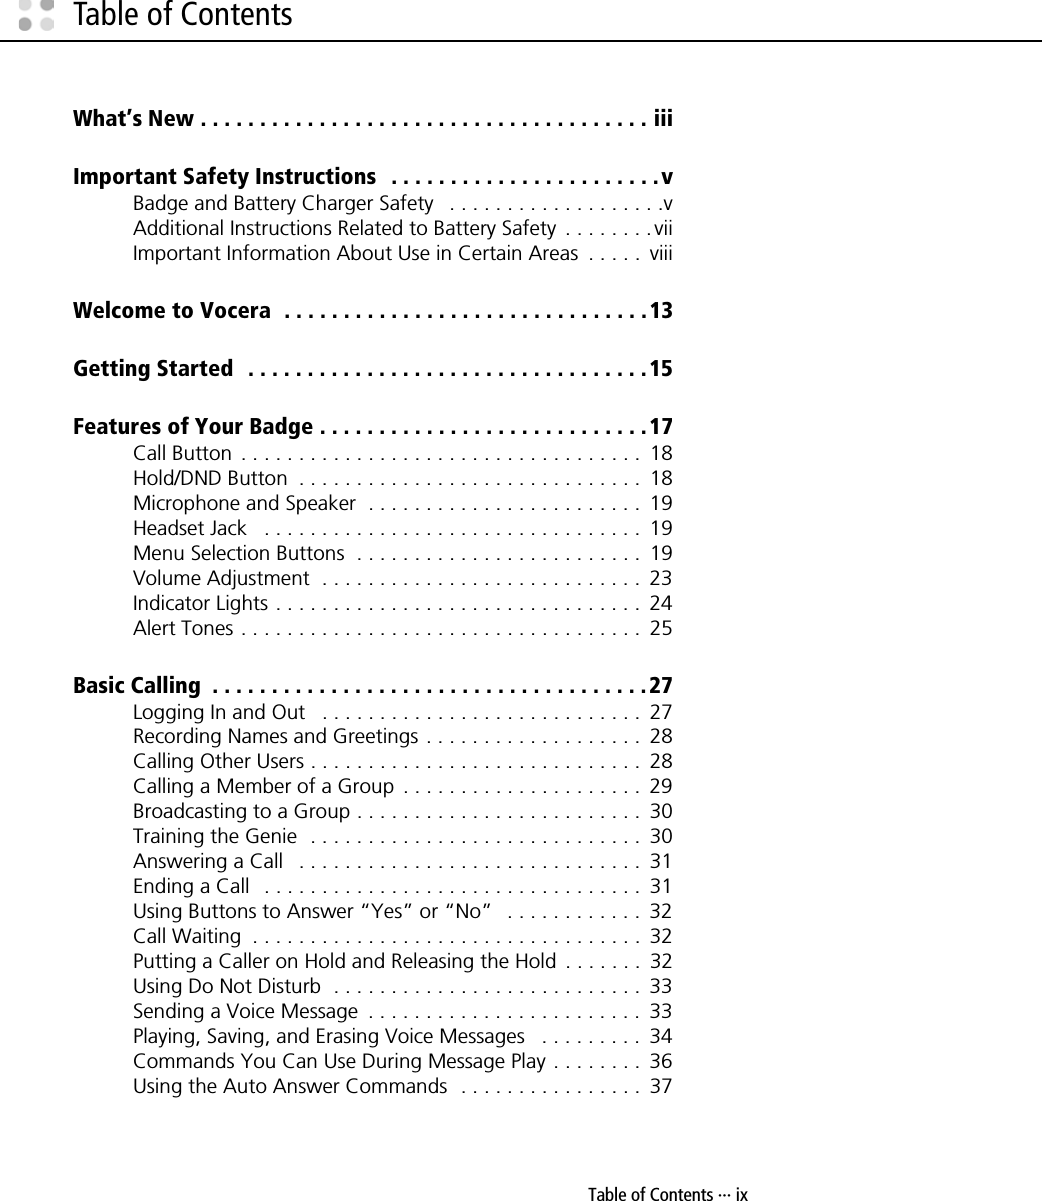 Table of Contents ··· ixTable of ContentsWhat’s New . . . . . . . . . . . . . . . . . . . . . . . . . . . . . . . . . . . . . . iiiImportant Safety Instructions   . . . . . . . . . . . . . . . . . . . . . . .vBadge and Battery Charger Safety   . . . . . . . . . . . . . . . . . . .vAdditional Instructions Related to Battery Safety  . . . . . . . . viiImportant Information About Use in Certain Areas  . . . . .  viiiWelcome to Vocera  . . . . . . . . . . . . . . . . . . . . . . . . . . . . . . .13Getting Started  . . . . . . . . . . . . . . . . . . . . . . . . . . . . . . . . . .15Features of Your Badge . . . . . . . . . . . . . . . . . . . . . . . . . . . .17Call Button  . . . . . . . . . . . . . . . . . . . . . . . . . . . . . . . . . . .  18Hold/DND Button  . . . . . . . . . . . . . . . . . . . . . . . . . . . . . .  18Microphone and Speaker  . . . . . . . . . . . . . . . . . . . . . . . .  19Headset Jack   . . . . . . . . . . . . . . . . . . . . . . . . . . . . . . . . .  19Menu Selection Buttons  . . . . . . . . . . . . . . . . . . . . . . . . .  19Volume Adjustment  . . . . . . . . . . . . . . . . . . . . . . . . . . . .  23Indicator Lights . . . . . . . . . . . . . . . . . . . . . . . . . . . . . . . .  24Alert Tones . . . . . . . . . . . . . . . . . . . . . . . . . . . . . . . . . . .  25Basic Calling  . . . . . . . . . . . . . . . . . . . . . . . . . . . . . . . . . . . . .27Logging In and Out   . . . . . . . . . . . . . . . . . . . . . . . . . . . .  27Recording Names and Greetings . . . . . . . . . . . . . . . . . . .  28Calling Other Users . . . . . . . . . . . . . . . . . . . . . . . . . . . . .  28Calling a Member of a Group  . . . . . . . . . . . . . . . . . . . . .  29Broadcasting to a Group . . . . . . . . . . . . . . . . . . . . . . . . .  30Training the Genie  . . . . . . . . . . . . . . . . . . . . . . . . . . . . .  30Answering a Call   . . . . . . . . . . . . . . . . . . . . . . . . . . . . . .  31Ending a Call   . . . . . . . . . . . . . . . . . . . . . . . . . . . . . . . . .  31Using Buttons to Answer “Yes” or “No”   . . . . . . . . . . . .  32Call Waiting  . . . . . . . . . . . . . . . . . . . . . . . . . . . . . . . . . .  32Putting a Caller on Hold and Releasing the Hold  . . . . . . .  32Using Do Not Disturb  . . . . . . . . . . . . . . . . . . . . . . . . . . .  33Sending a Voice Message  . . . . . . . . . . . . . . . . . . . . . . . .  33Playing, Saving, and Erasing Voice Messages   . . . . . . . . .  34Commands You Can Use During Message Play . . . . . . . .  36Using the Auto Answer Commands  . . . . . . . . . . . . . . . .  37